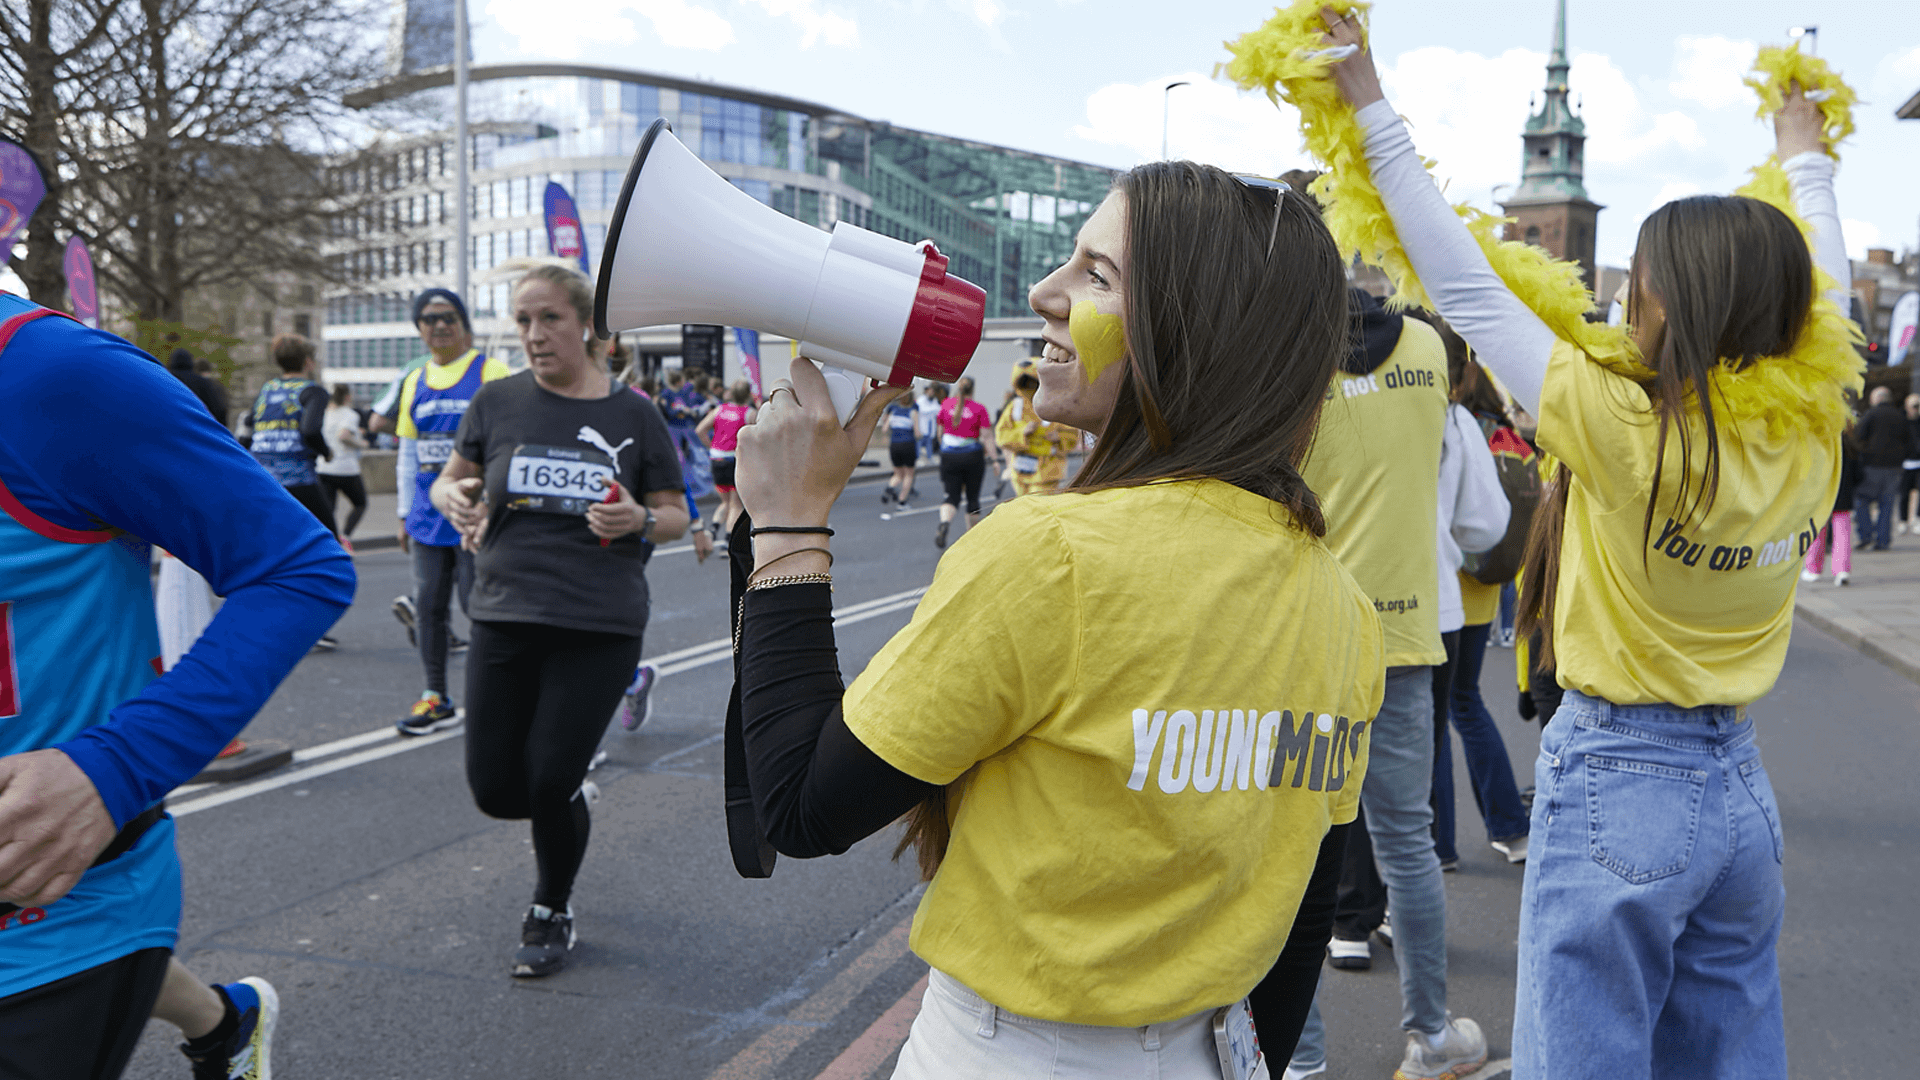 Volunteers in YoungMinds tops cheer passing runners at a half marathon, with a megaphone and feather boa.